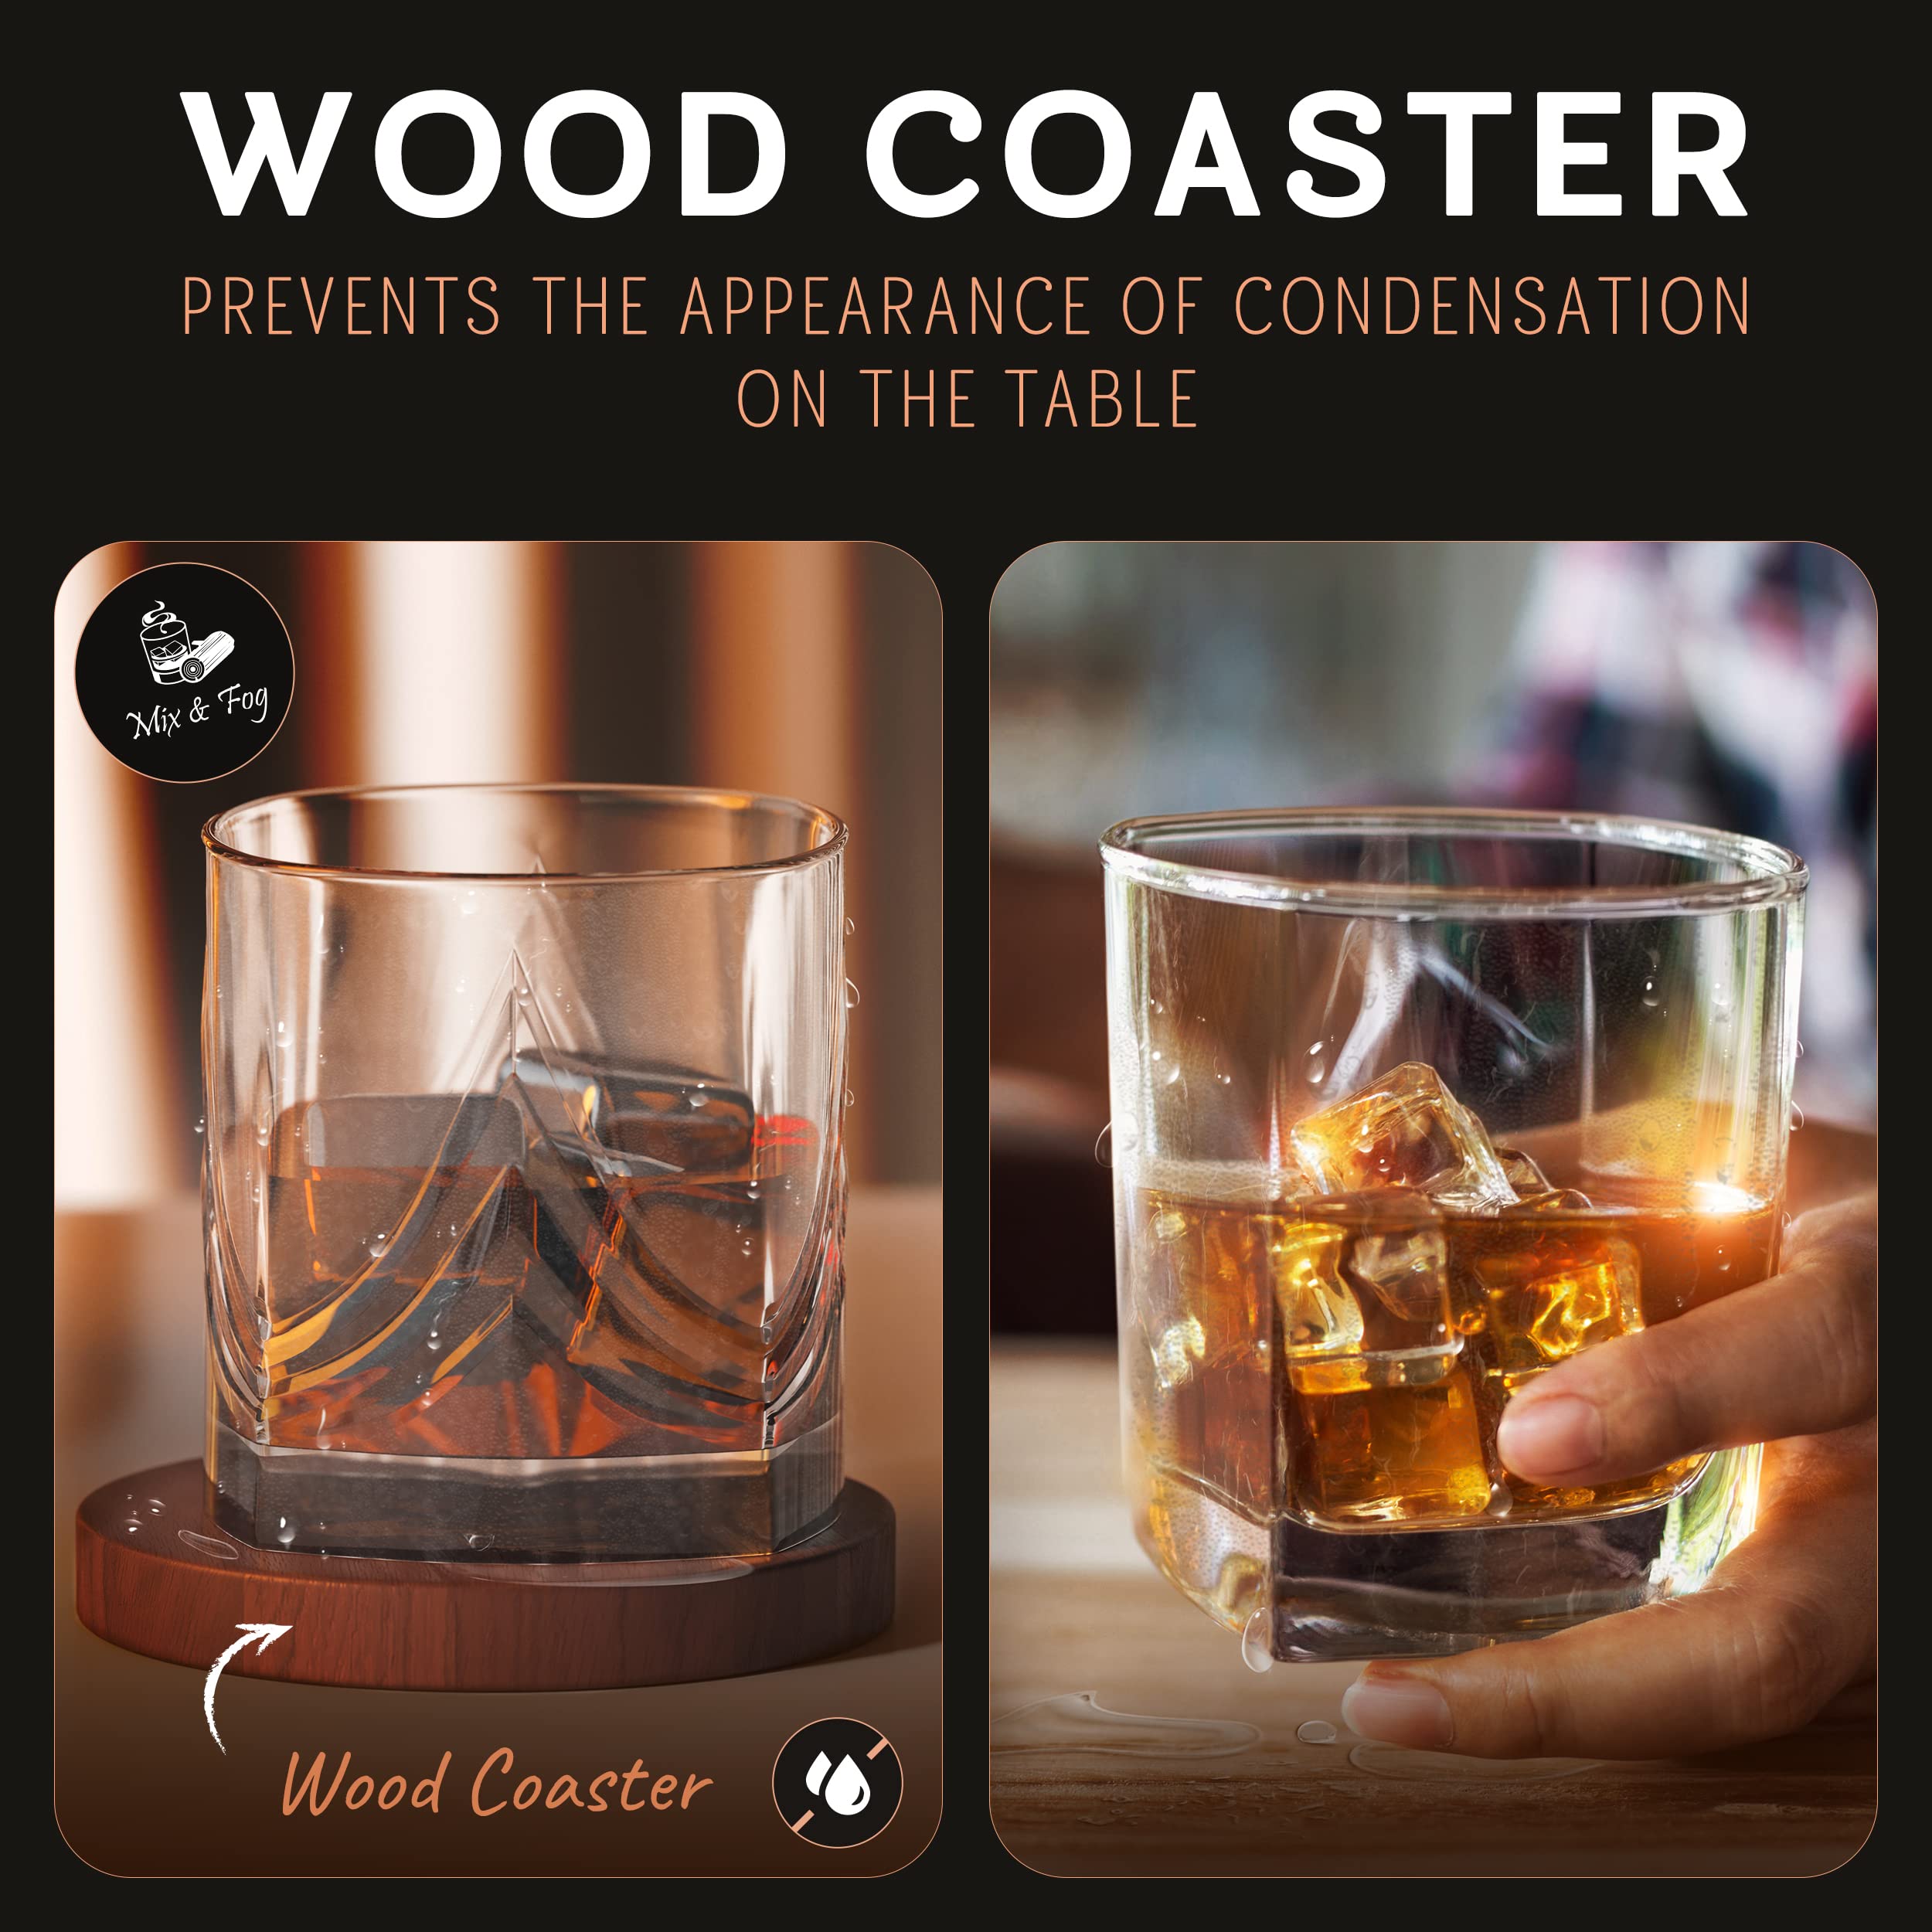 Old Fashioned Cocktail Smoker Mixology Bartenders Kit - For Cocktails, Bitters, Brandy & Scotch, Whiskey, Bourbon | 4 cans of Wood Chips, 4 Coasters, 8 Stainless Steel Whisky Stones, Torch (NO Butane)